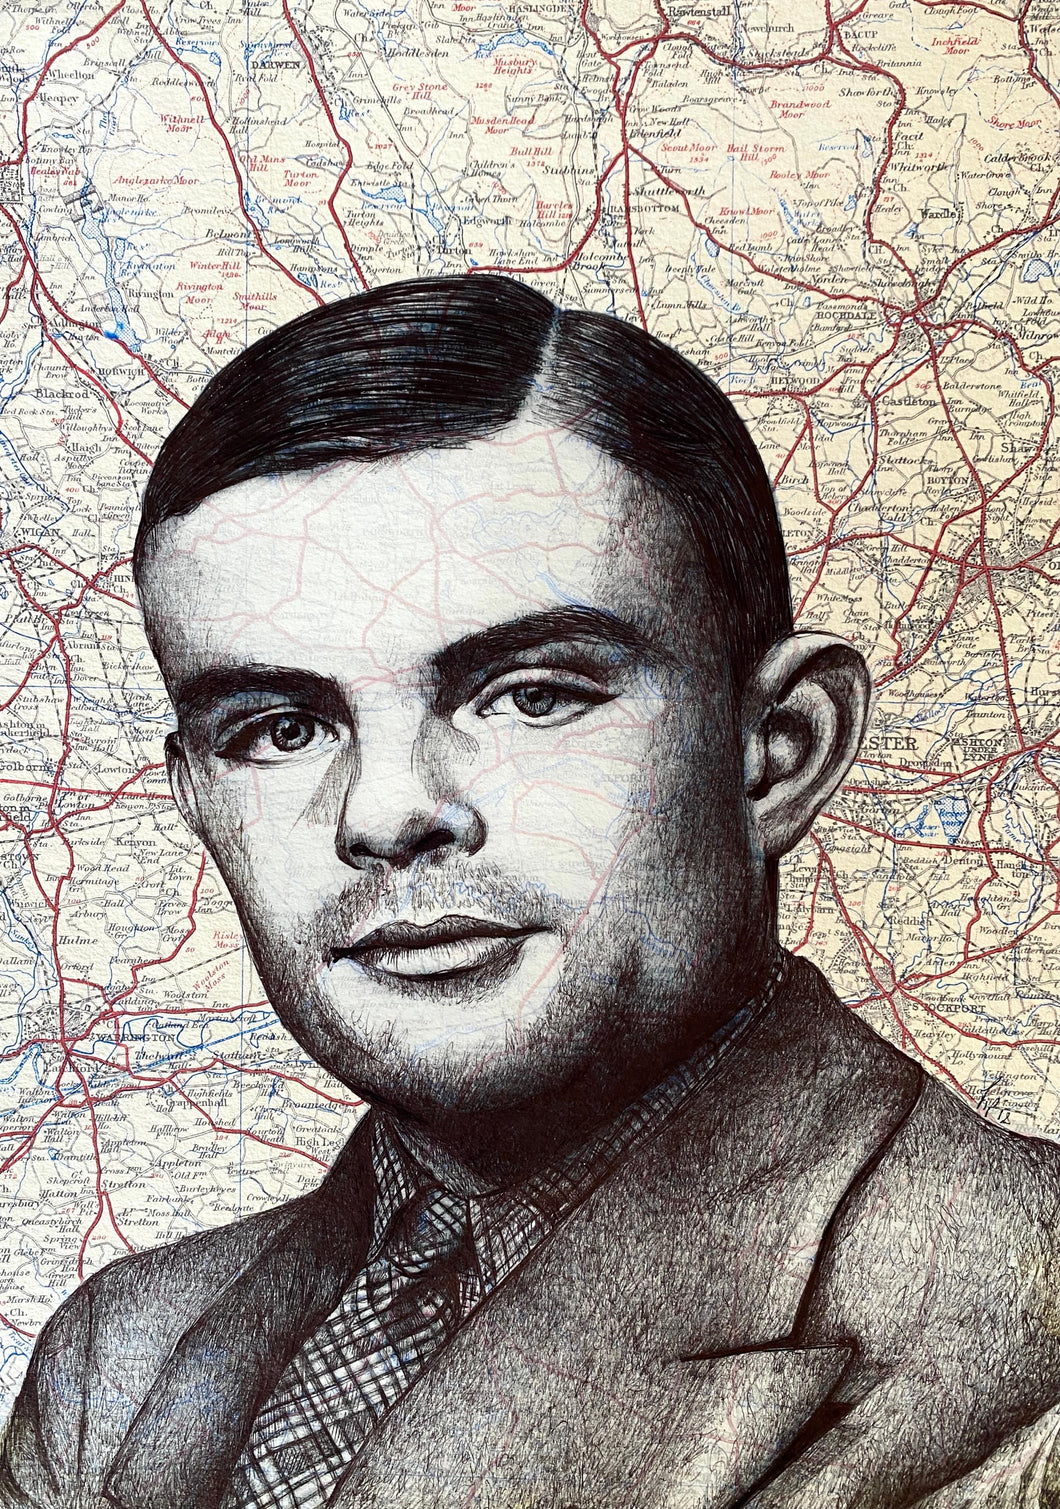 Alan Turing Inspired Portrait. Original Pen Drawing Over Map Of Manchester. A4. Unframed